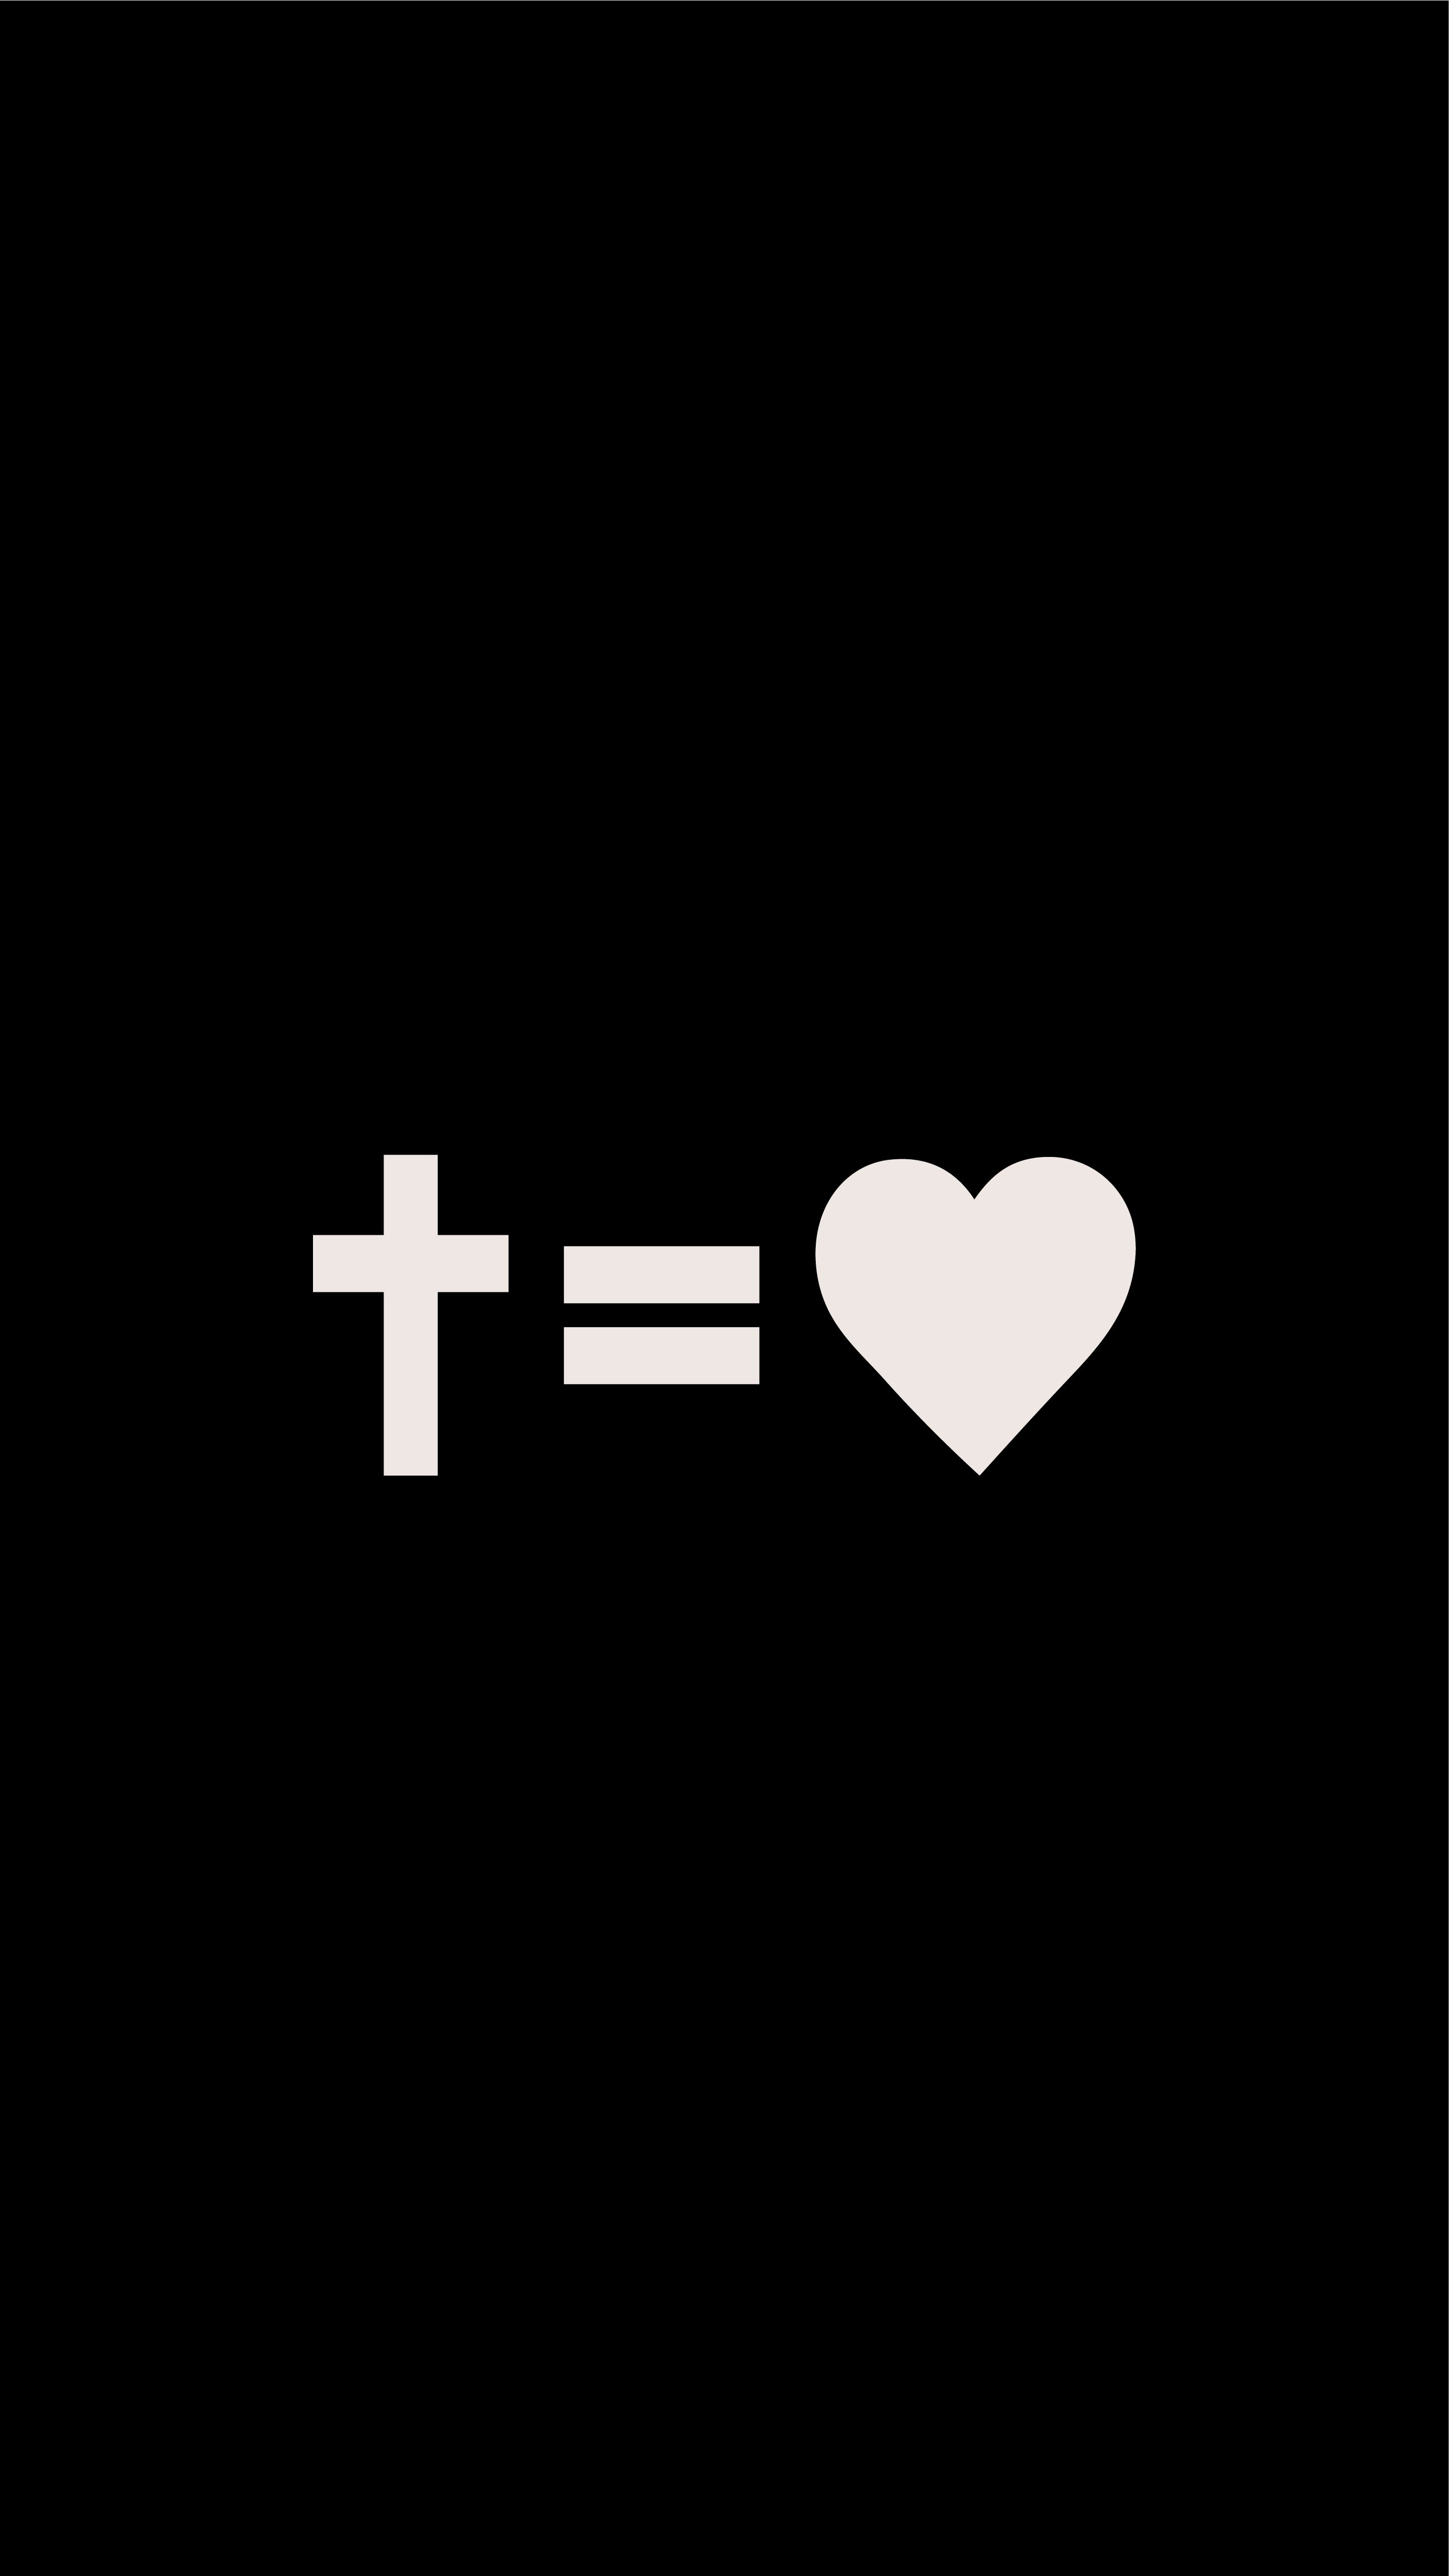 Cross Equals Love, Invite Cards, Banners, Social Media, Phone Wallpaper & More!